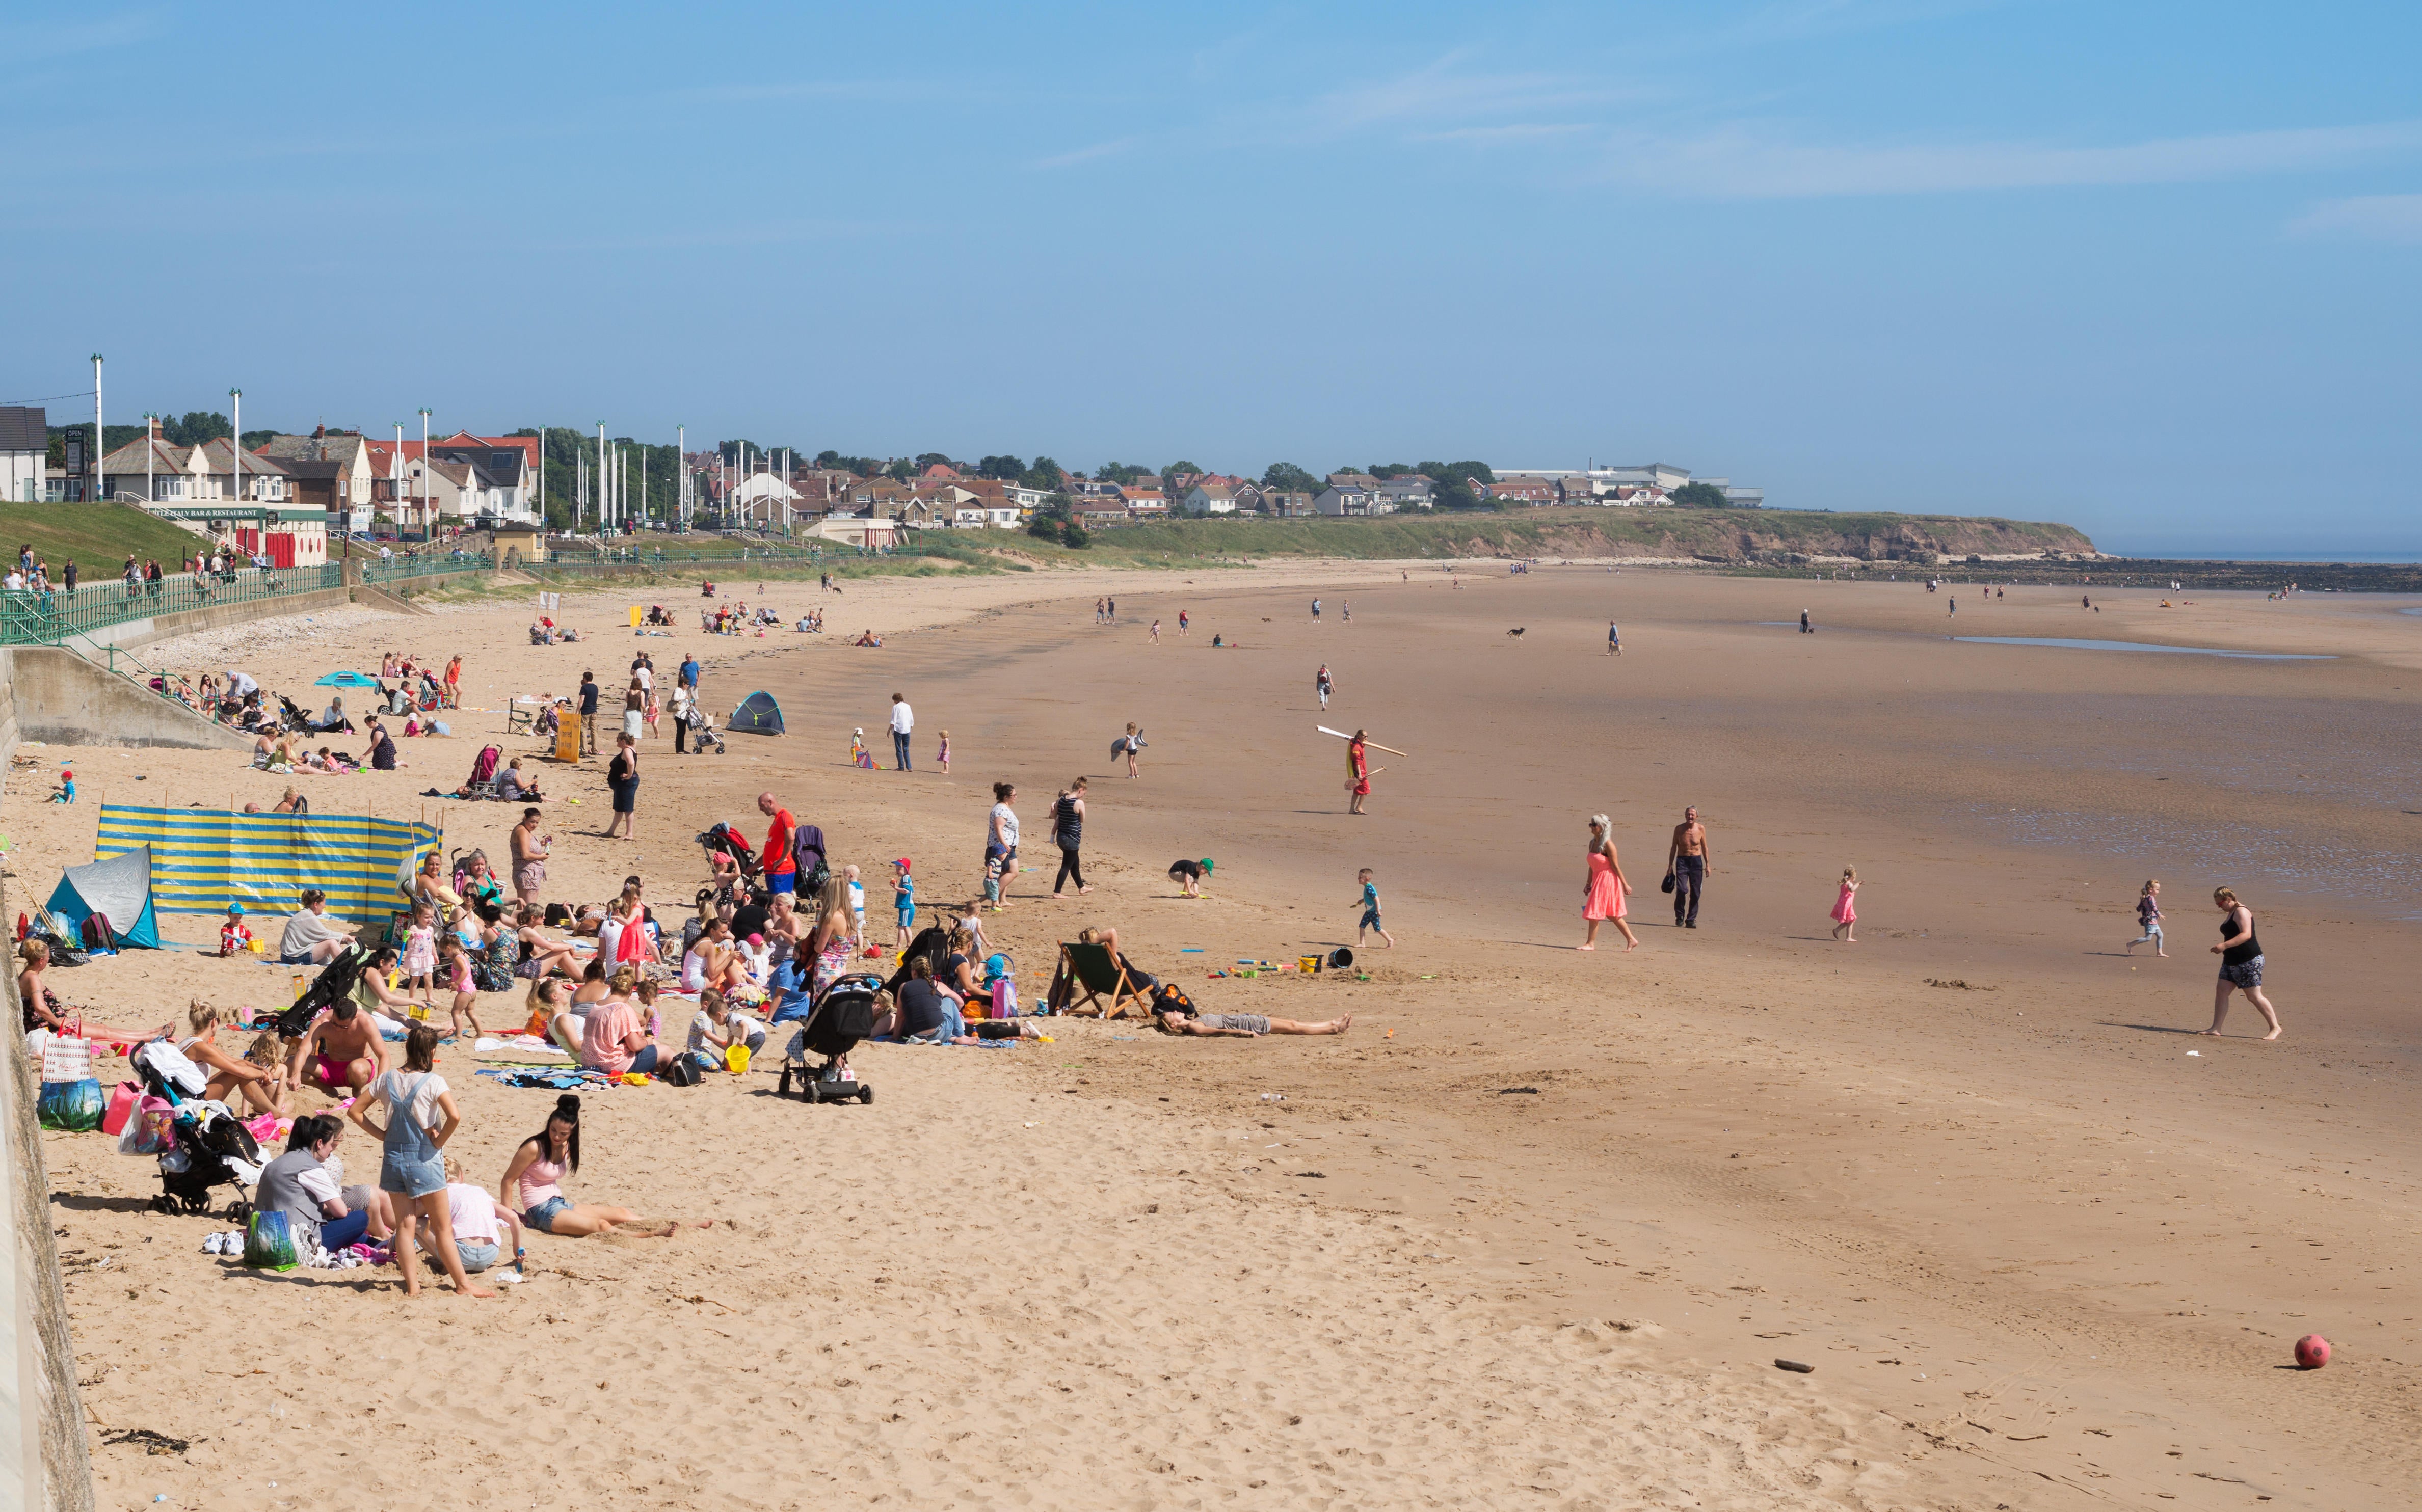 Human remains were discovered on Seaburn on Good Friday